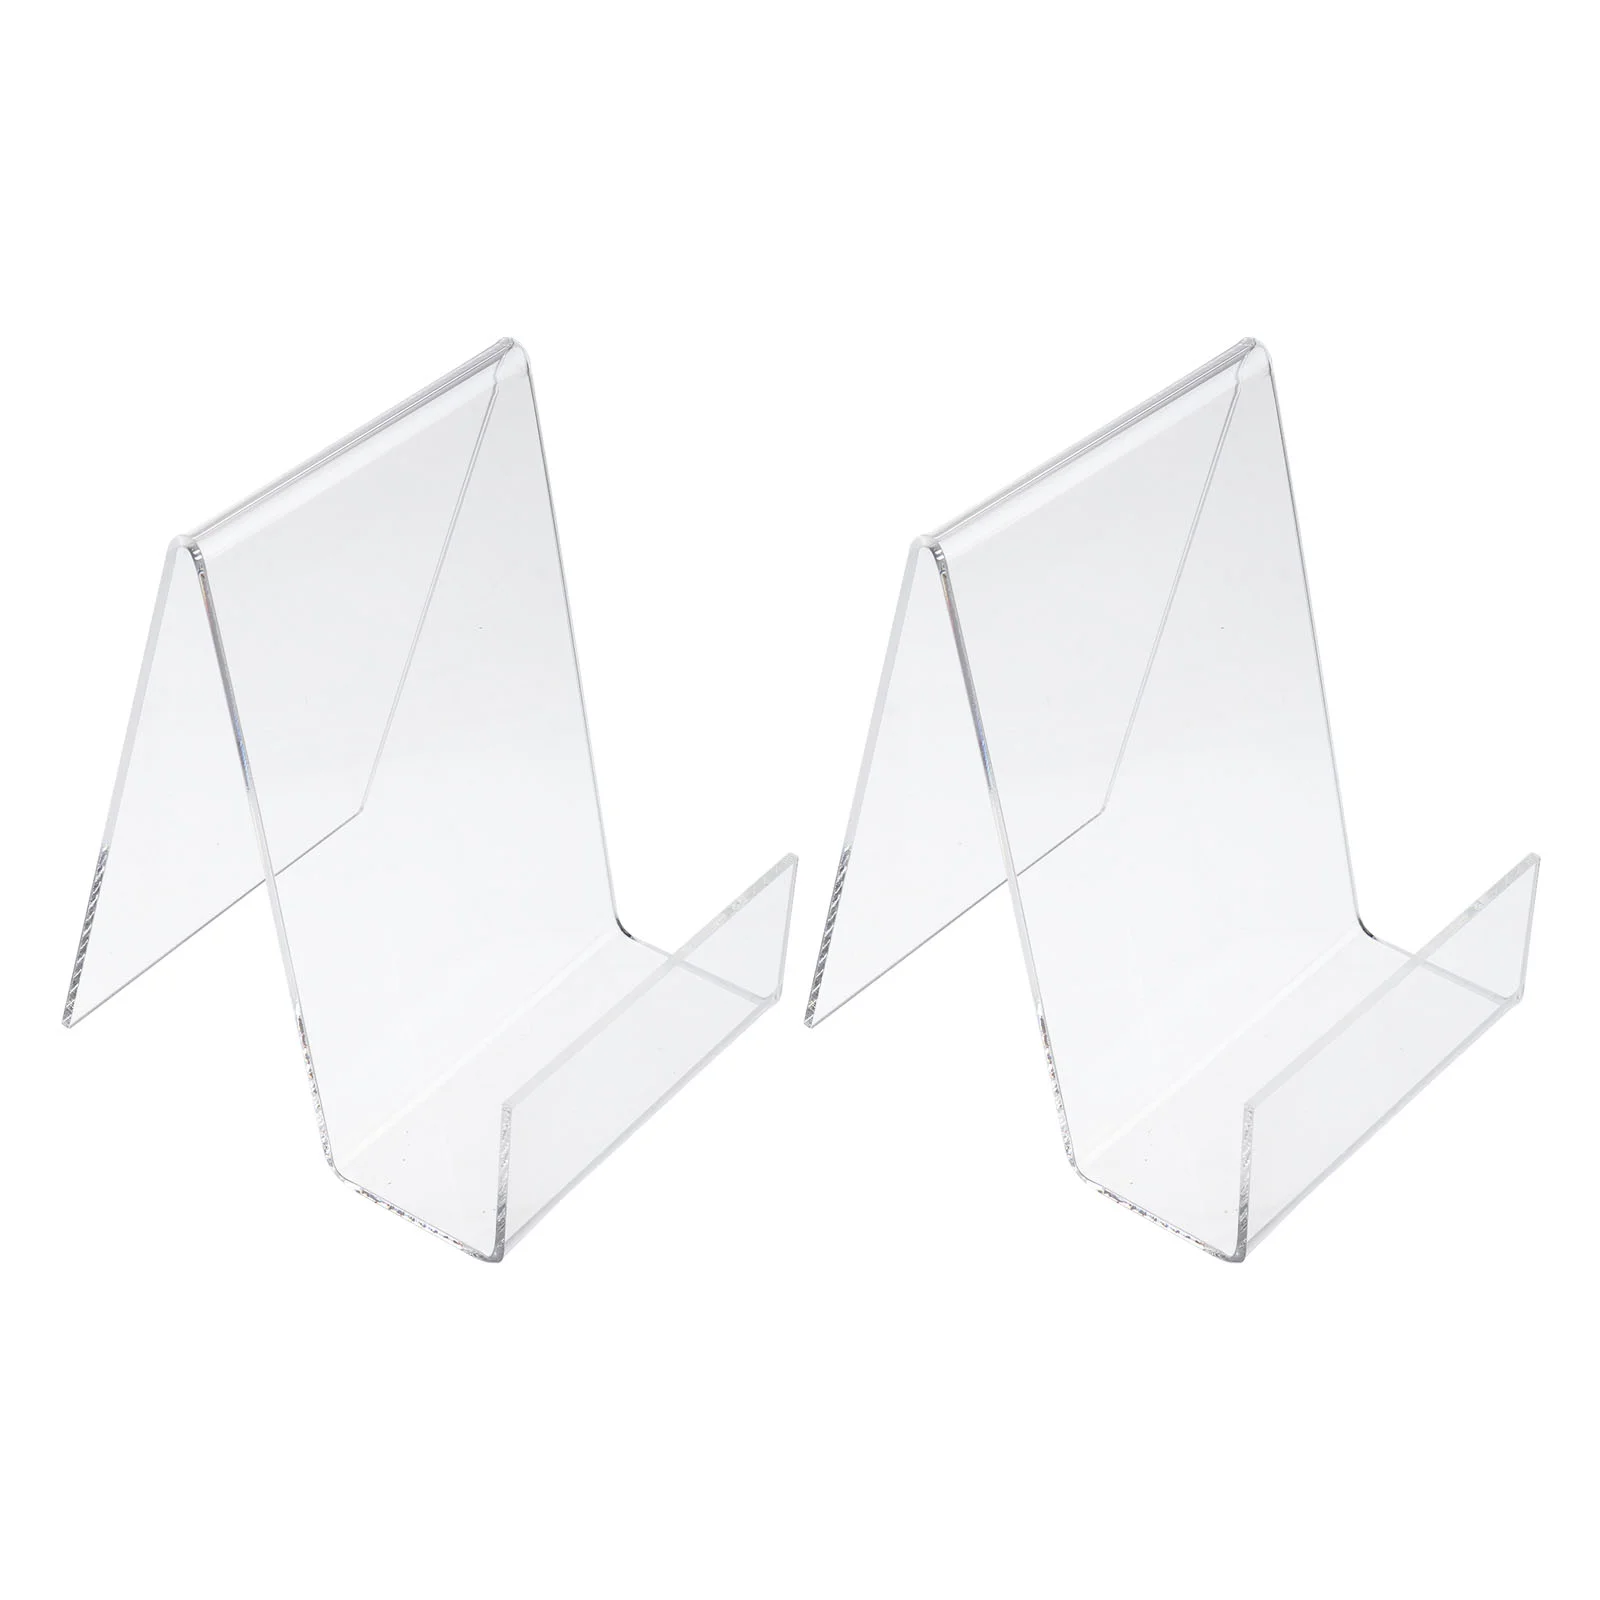 Book Stand, 2pcs Clear Display Easel Transparent Book Display Stand Tablet Holder Book Holder Rack Photo Holders for Pictures book stand 2pcs clear display easel transparent book display stand tablet holder book holder rack photo holders for pictures